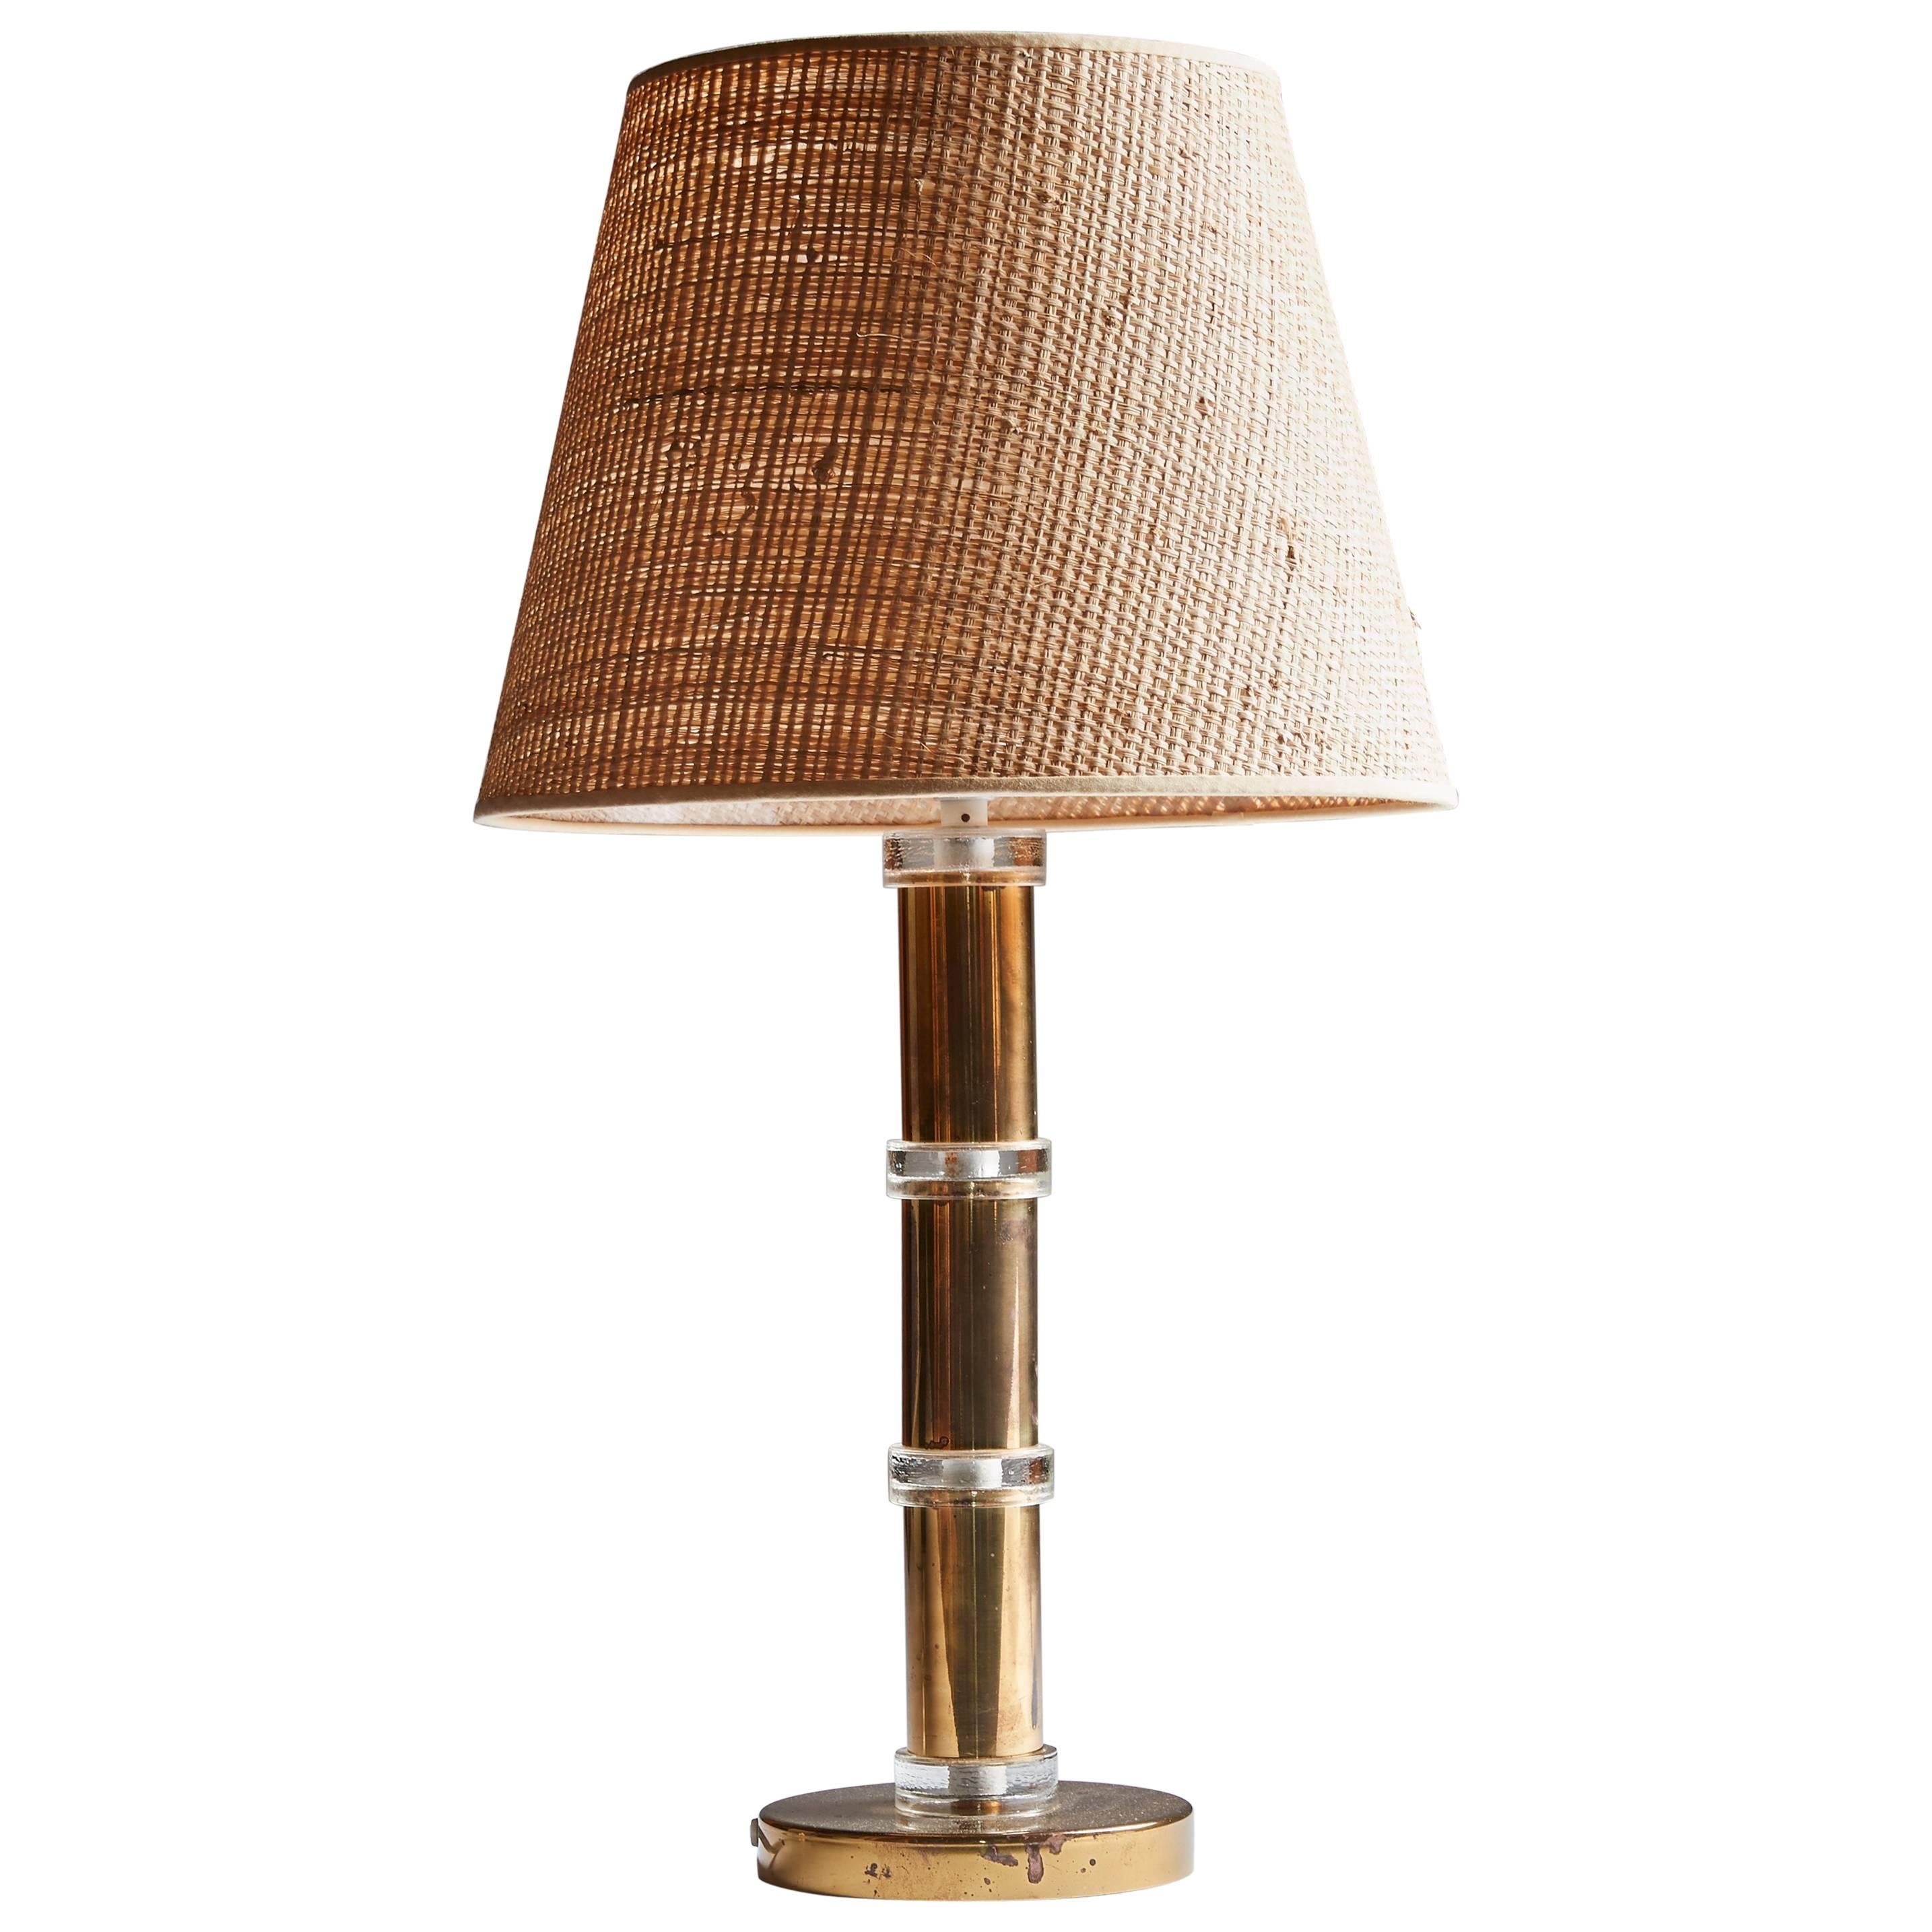 Swedish Table Lamp, Brass and Glass, 1960s For Sale